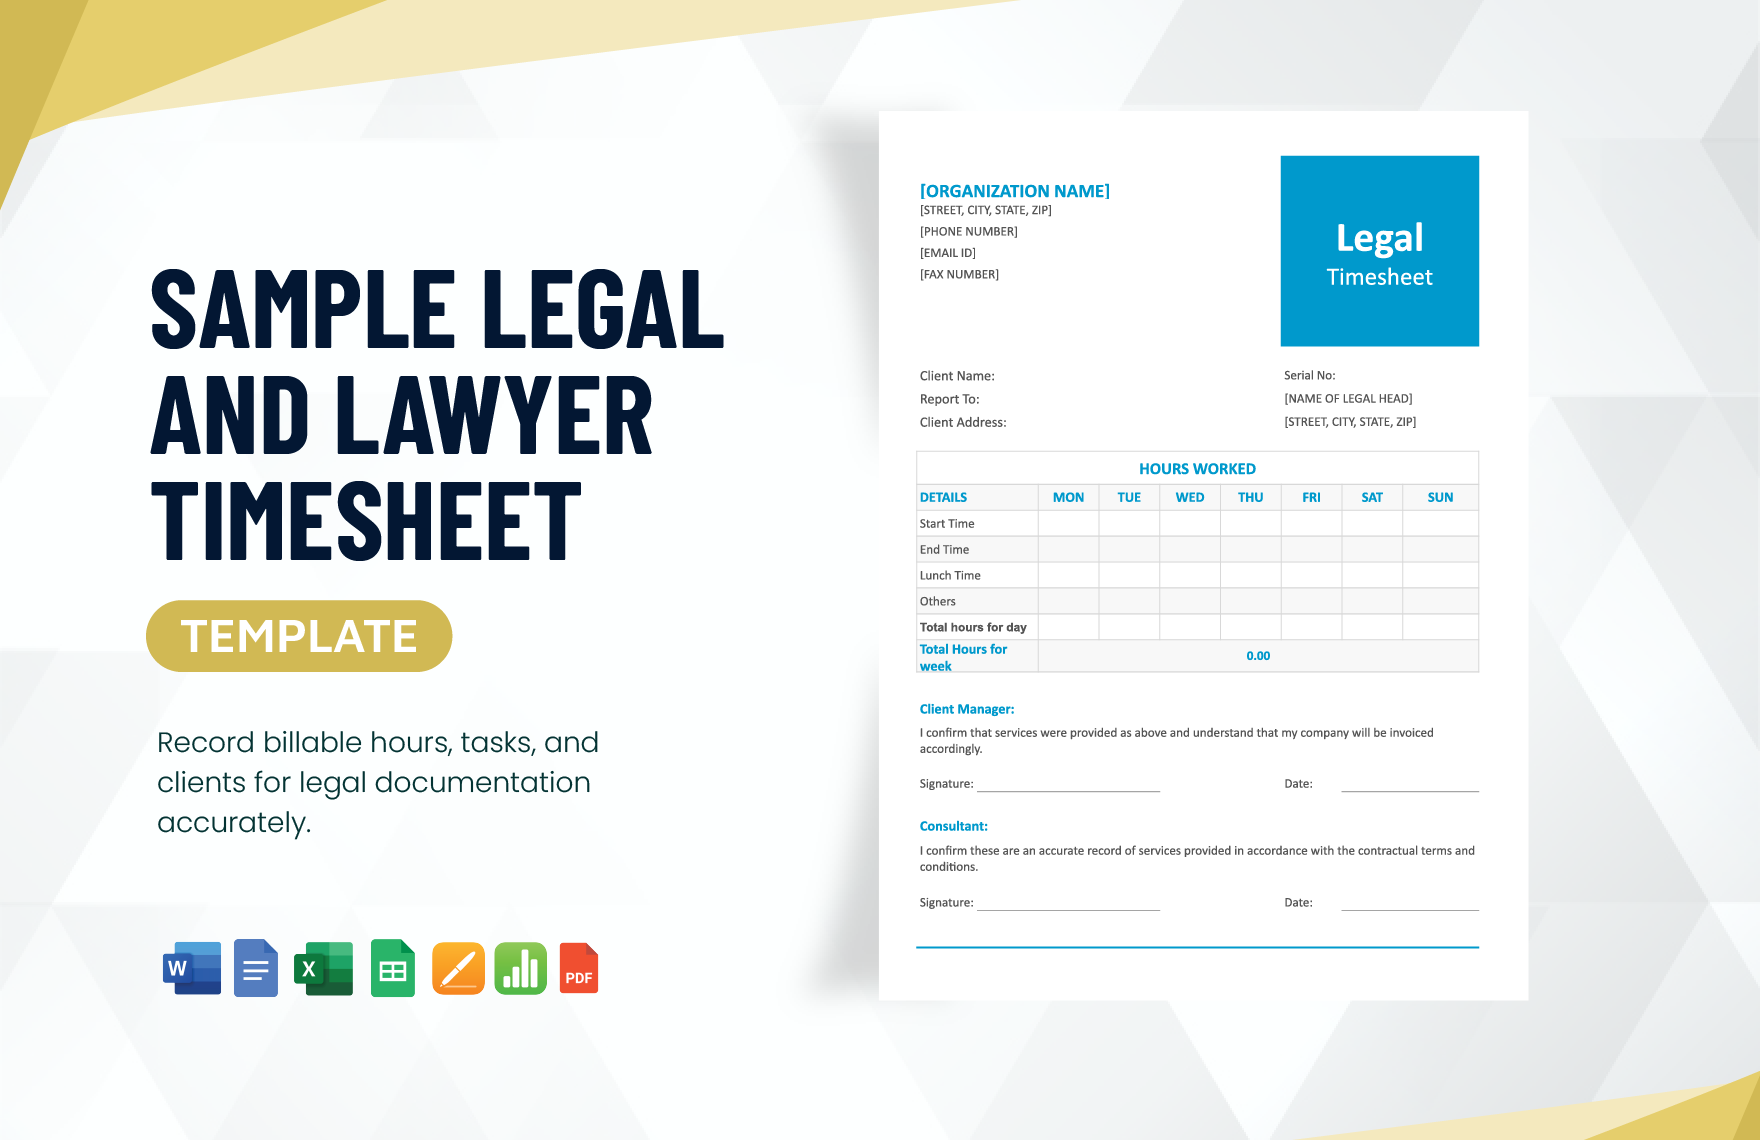 Sample Legal and Lawyer Timesheet Template in Word, Google Docs, Excel, PDF, Google Sheets, Apple Pages, Apple Numbers